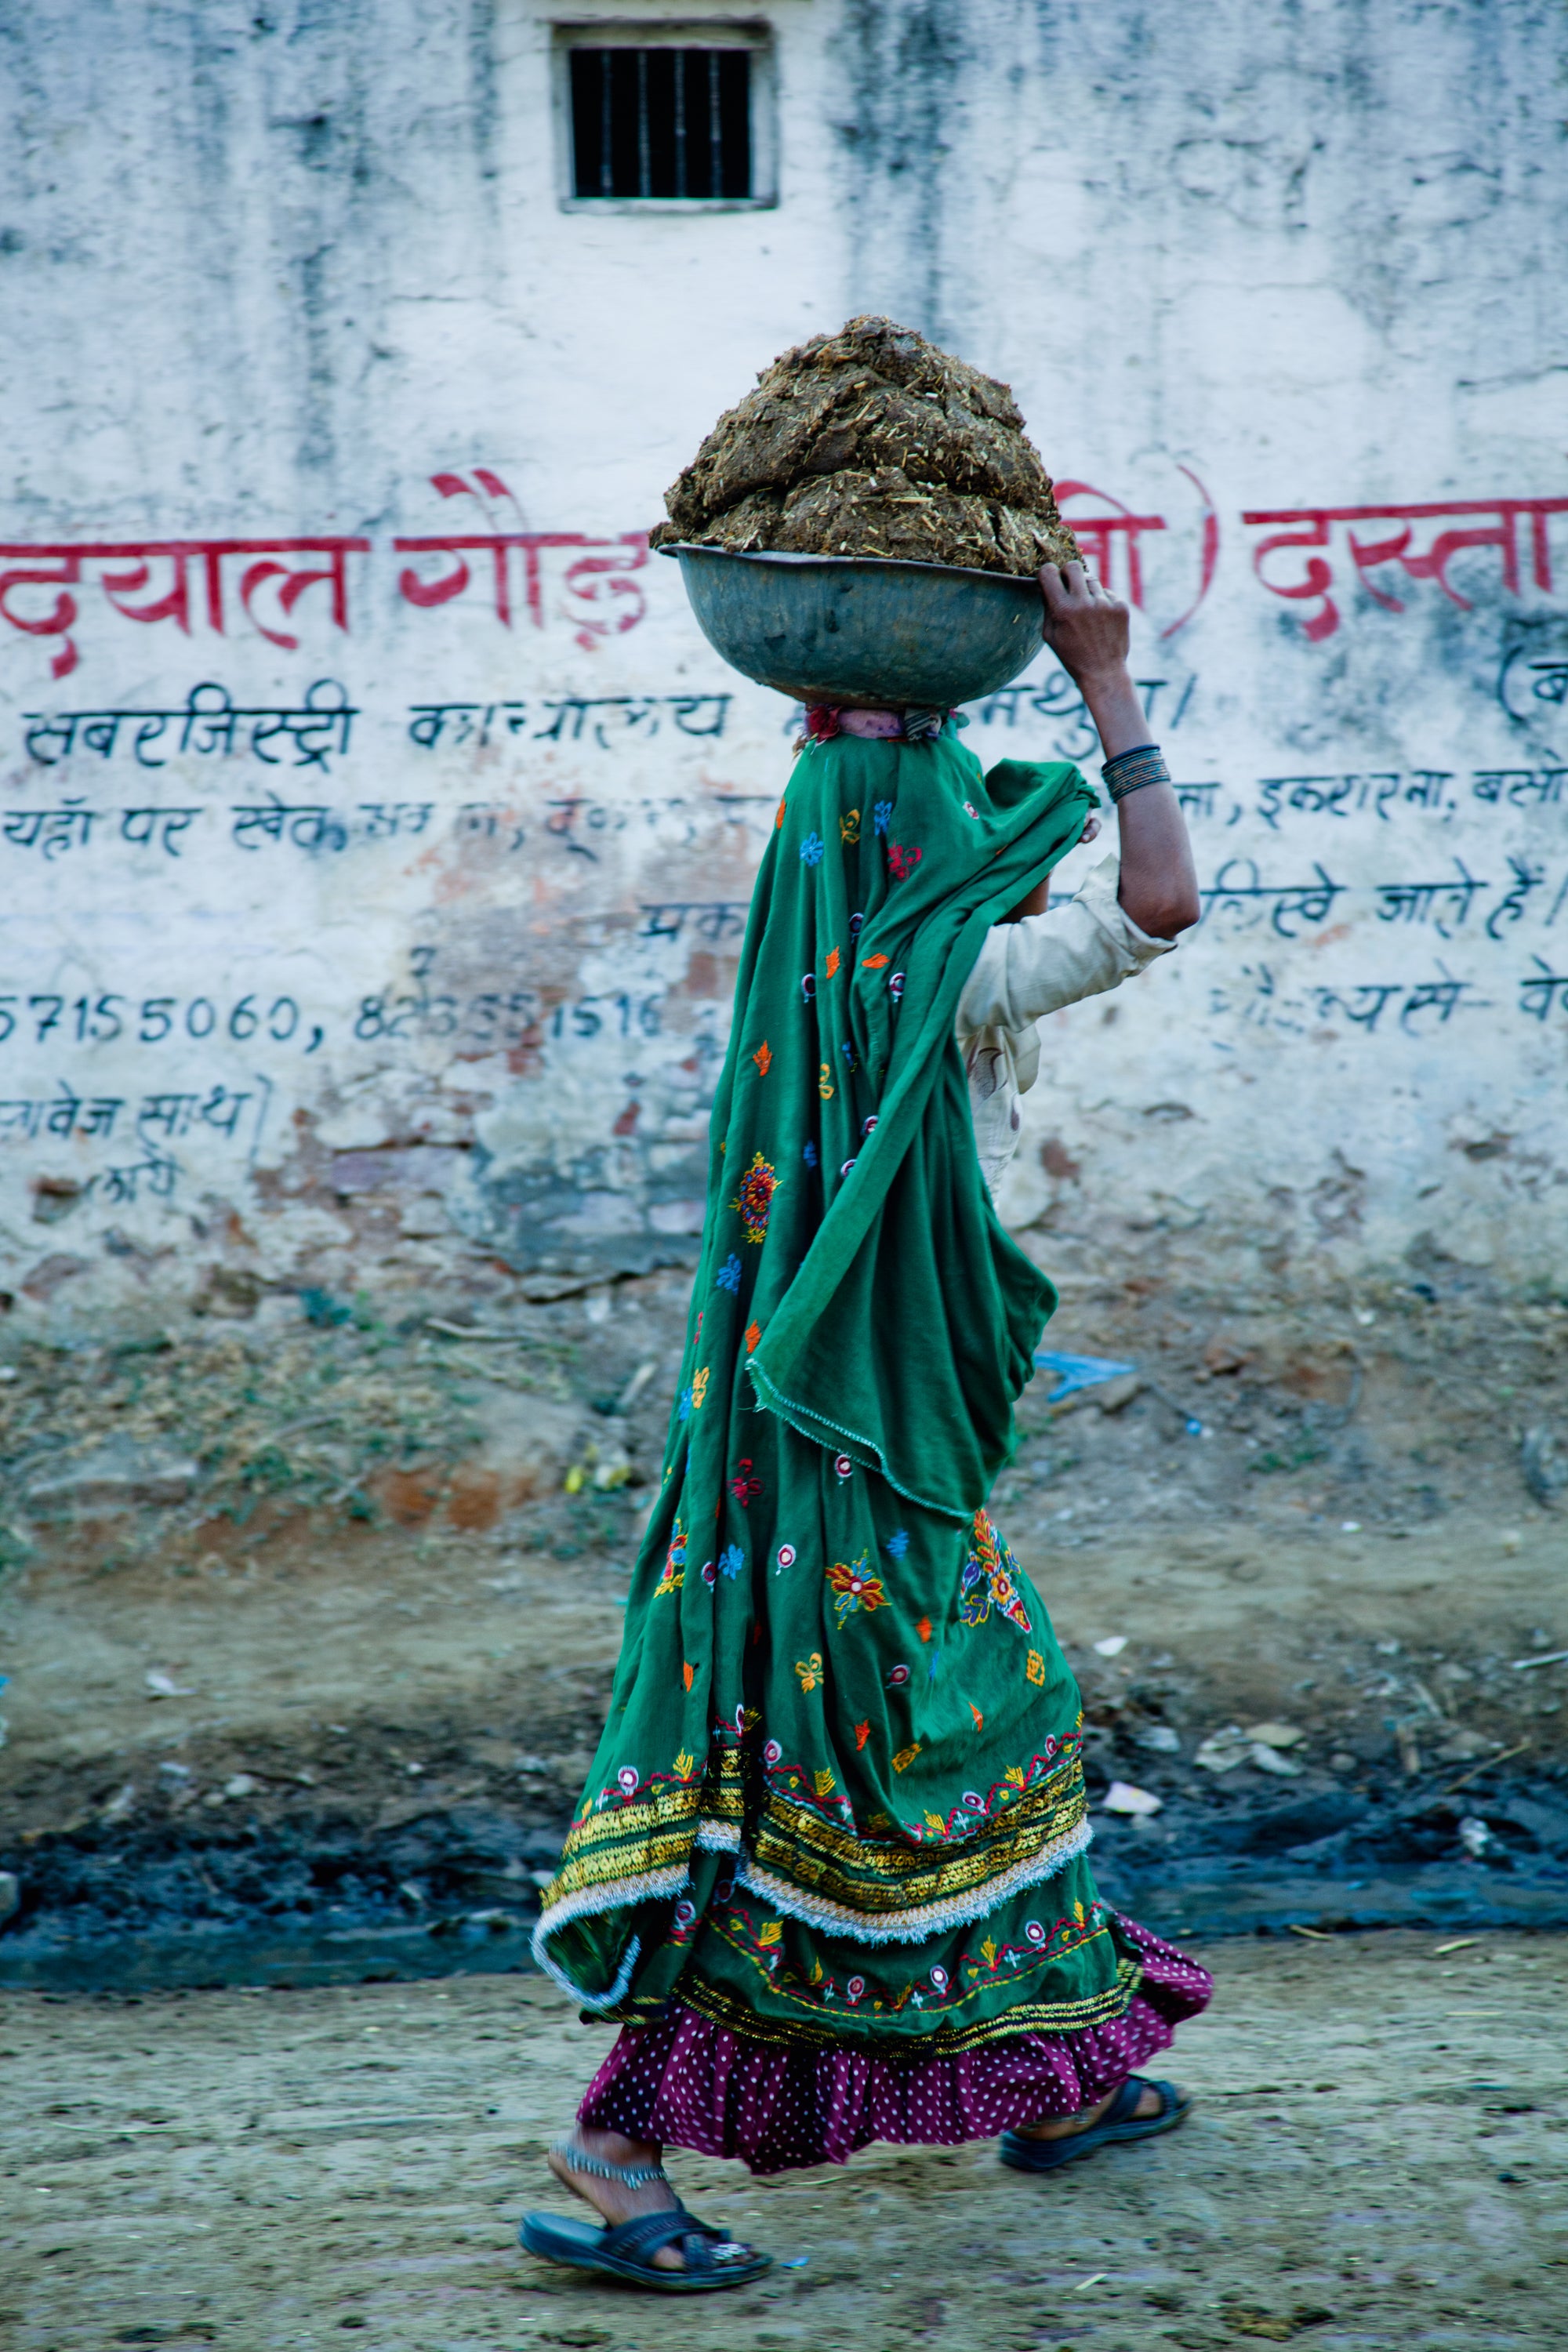 A woman carrying cow dung that she has collected for fuel #2/8